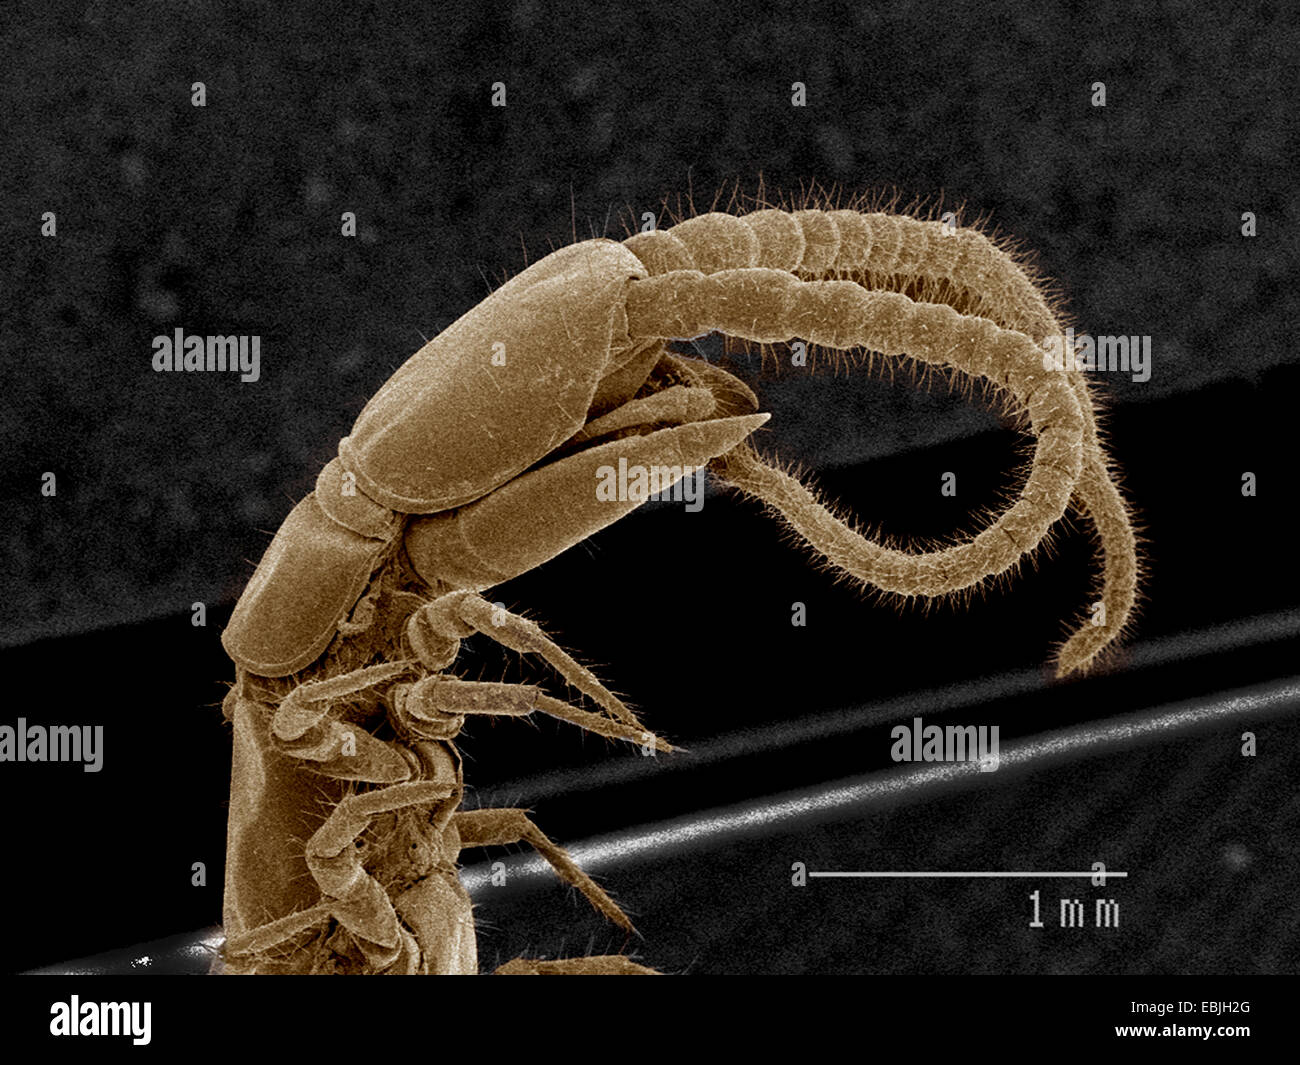 Head and fangs of centipede, Chilopoda SEM Stock Photo